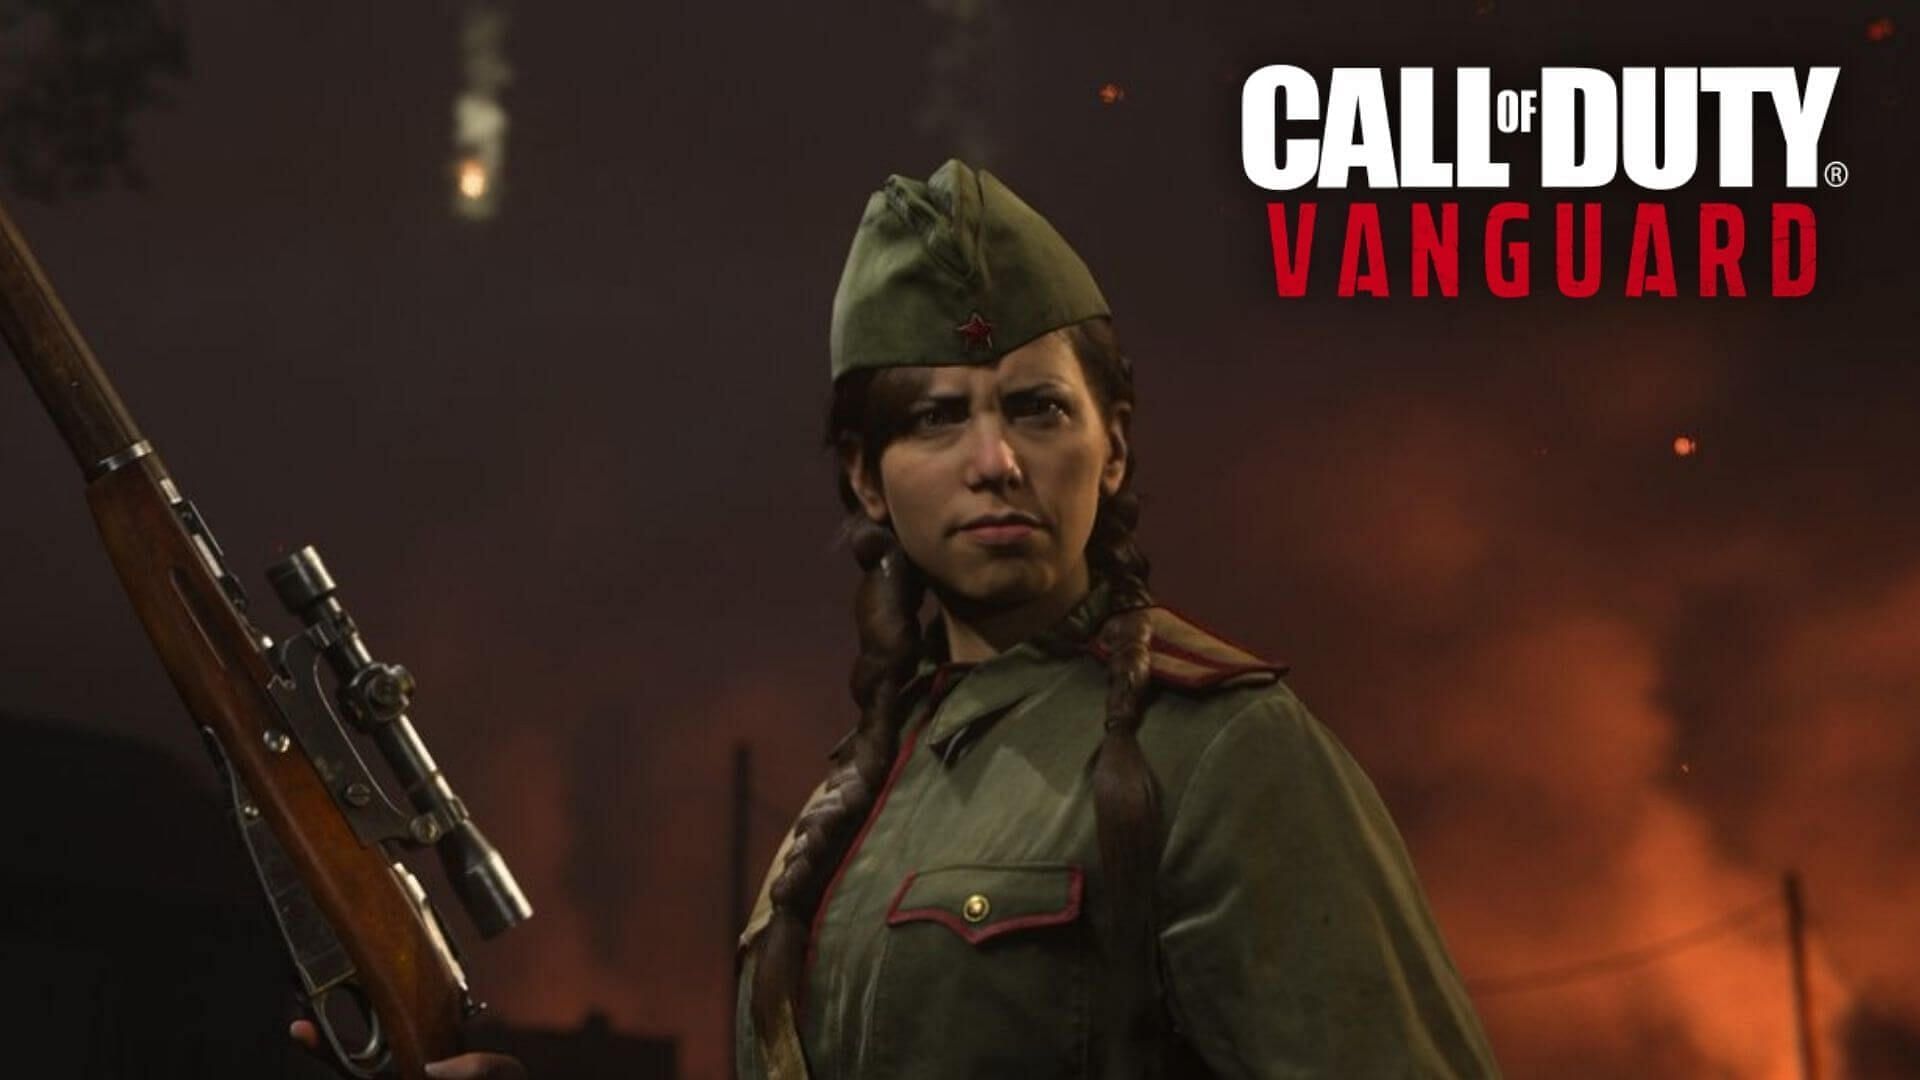 Champion Hill in Call of Duty Vanguard features intense 2v2 gunfights (Image by Activision)